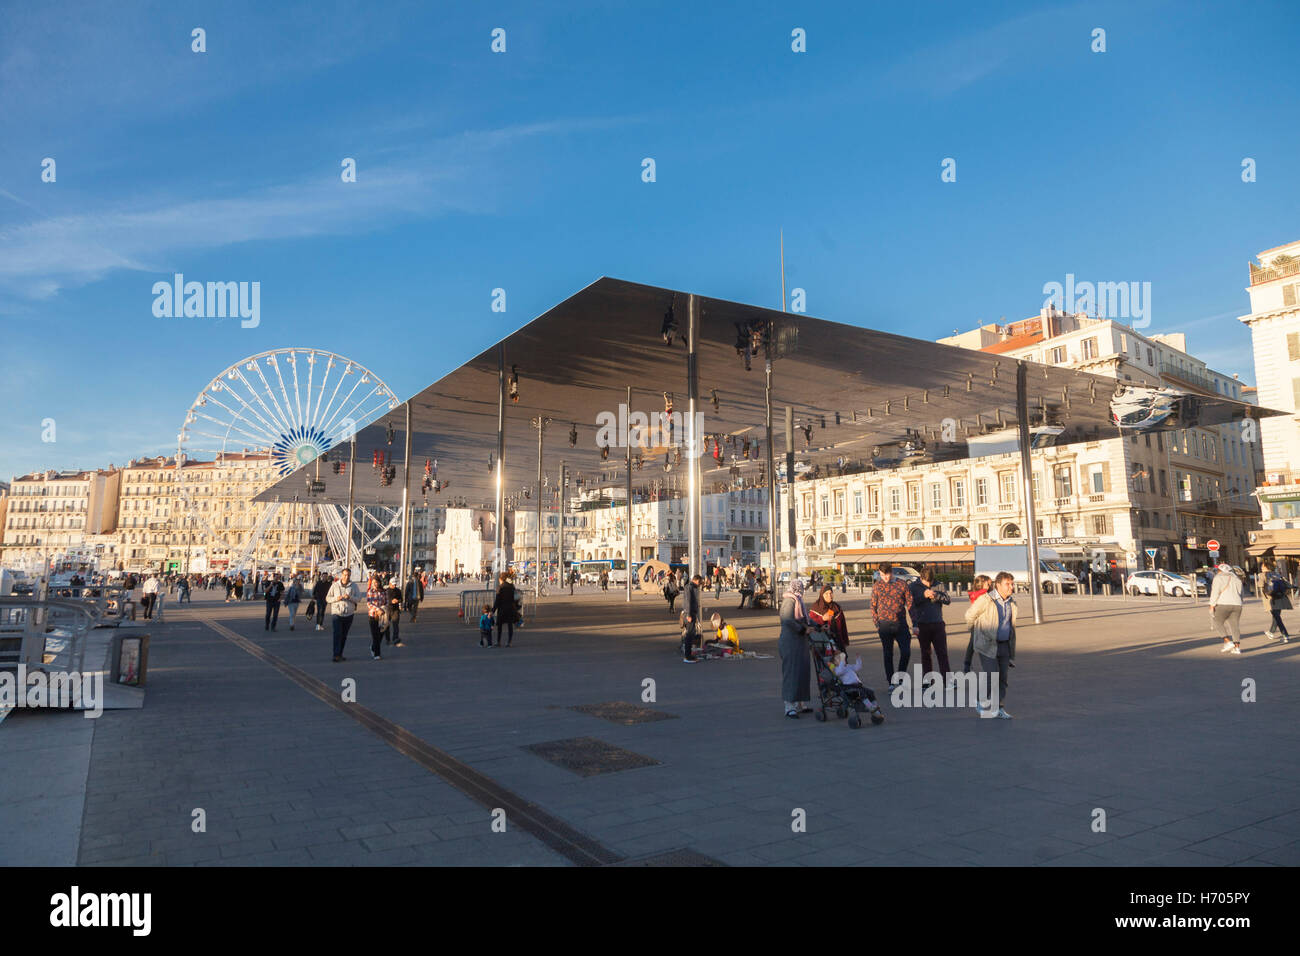 People under Norman Fosters giant pavilion mirror on the waterfront promenade in the Old Port of Marseille (Vieux-Port) Stock Photo